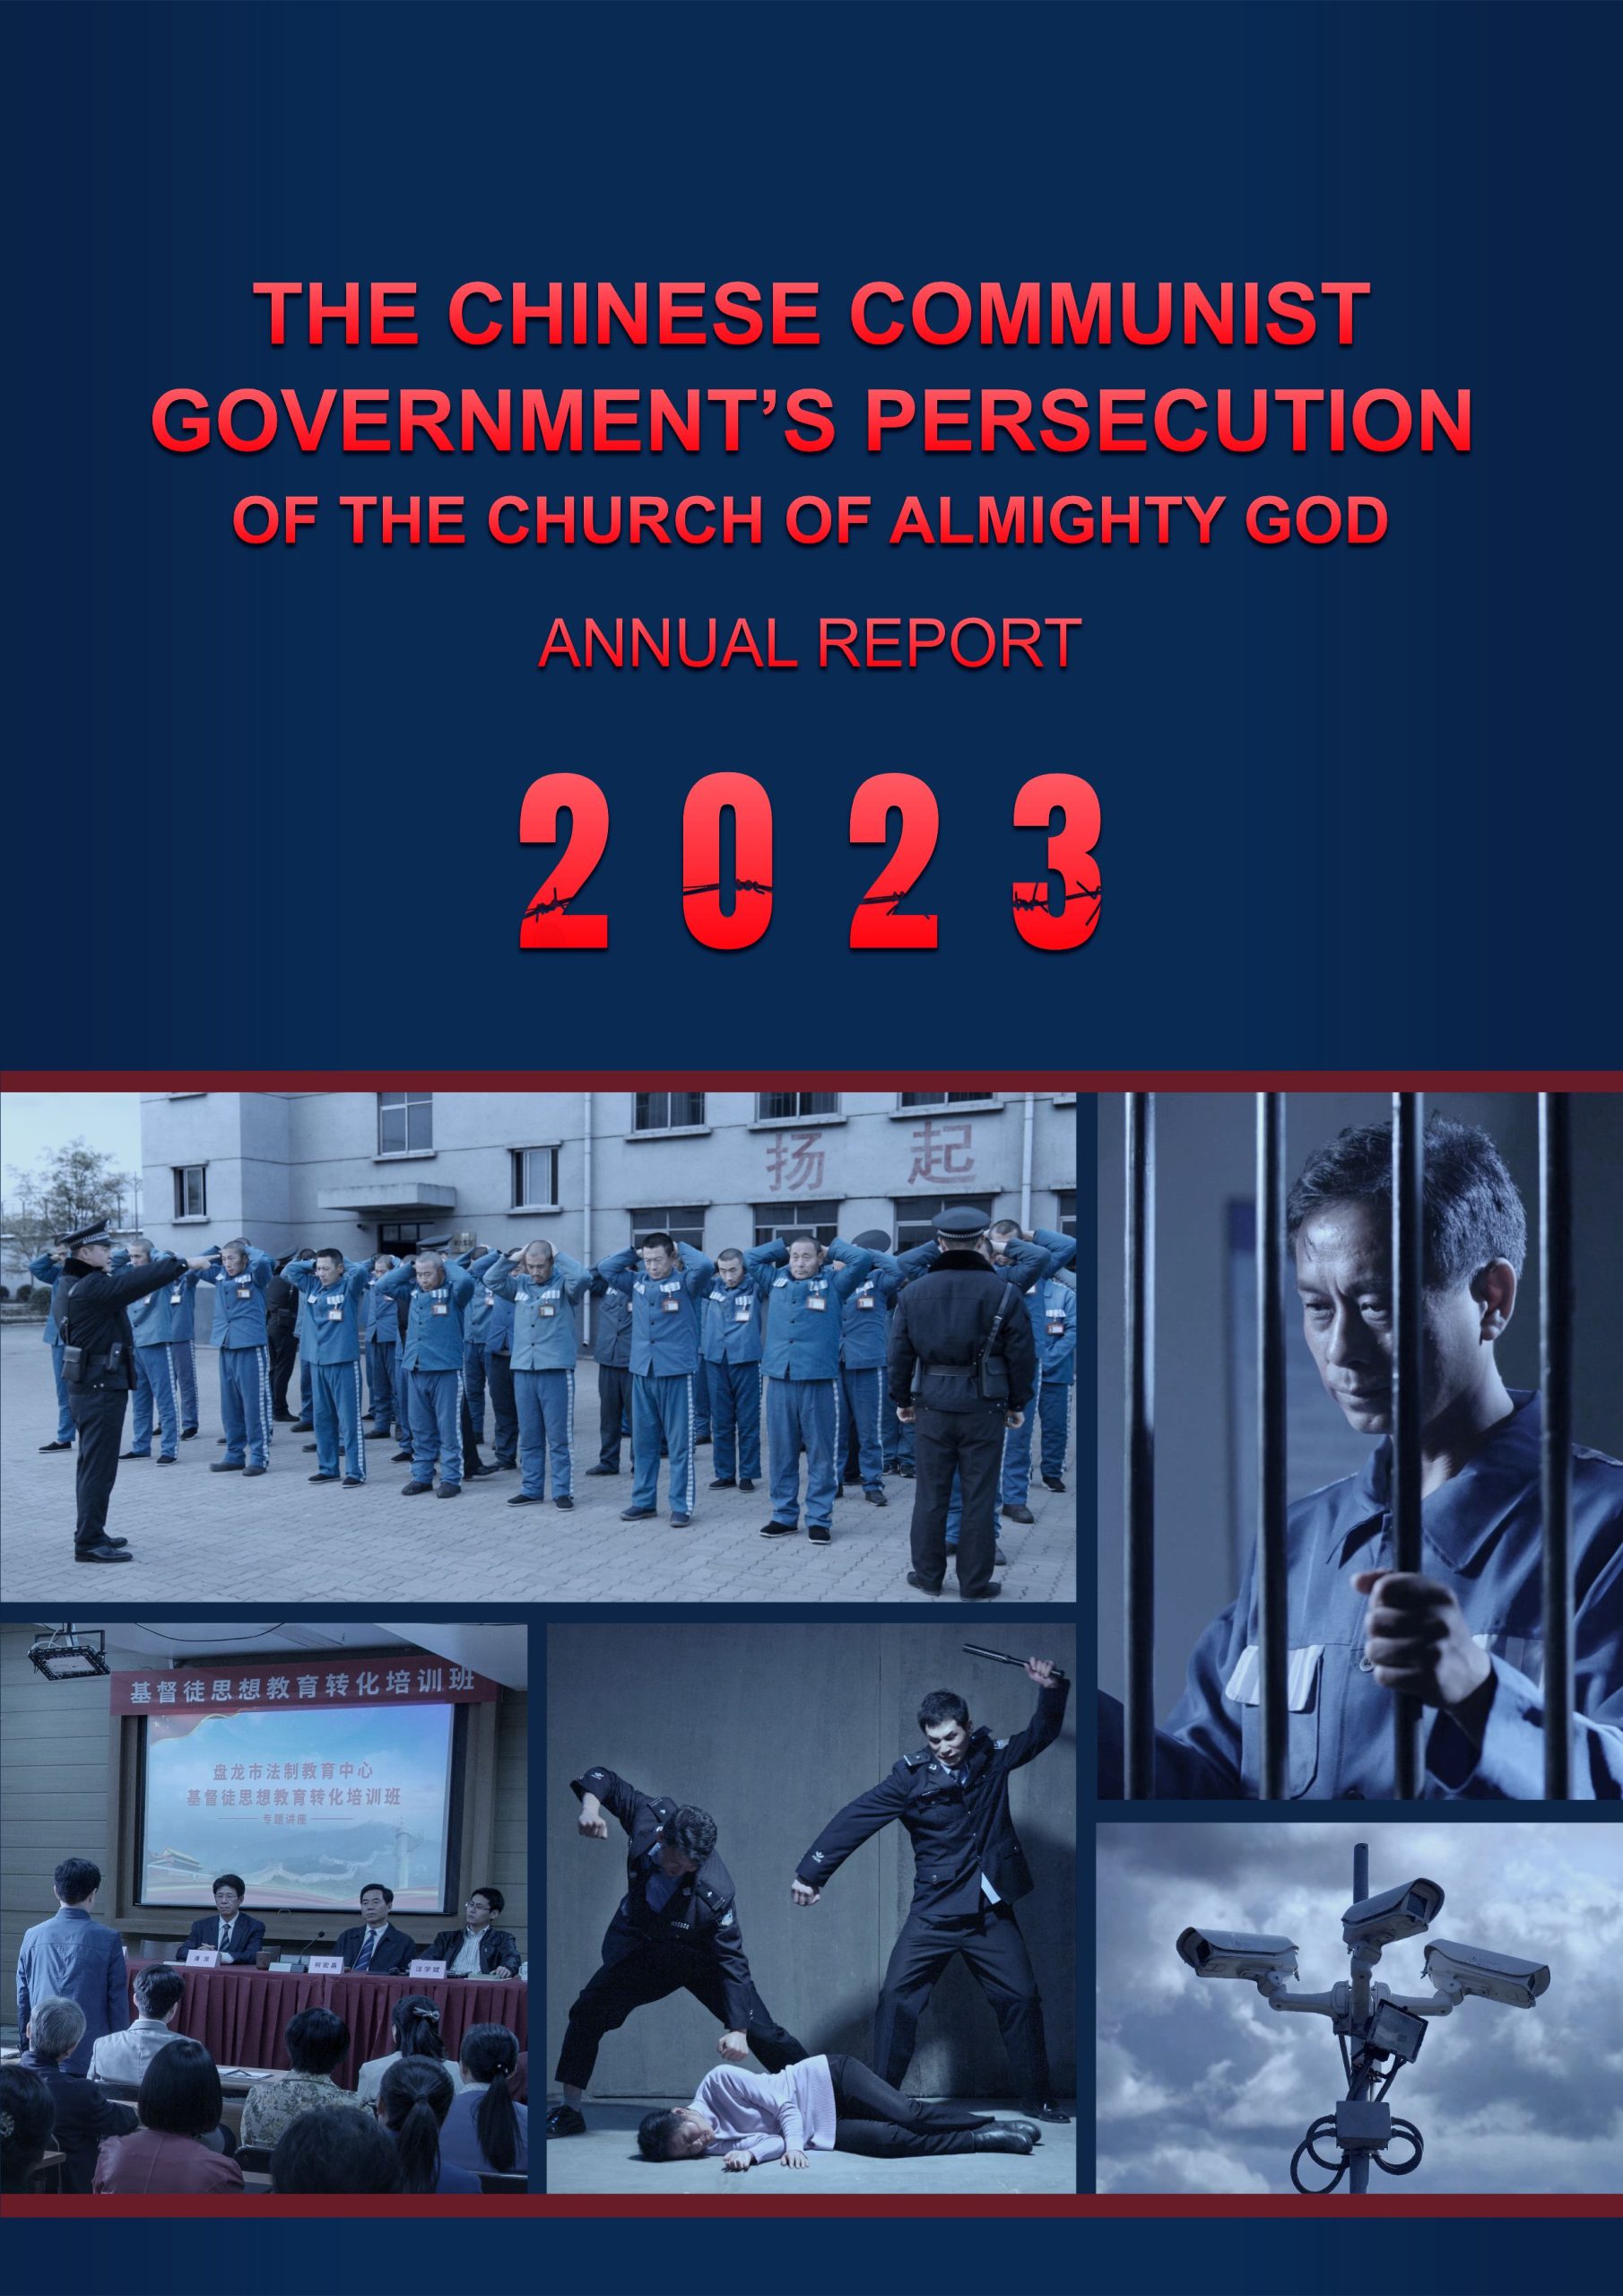 2023 Annual Report on the CCP’s Persecution of The Church of Almighty God